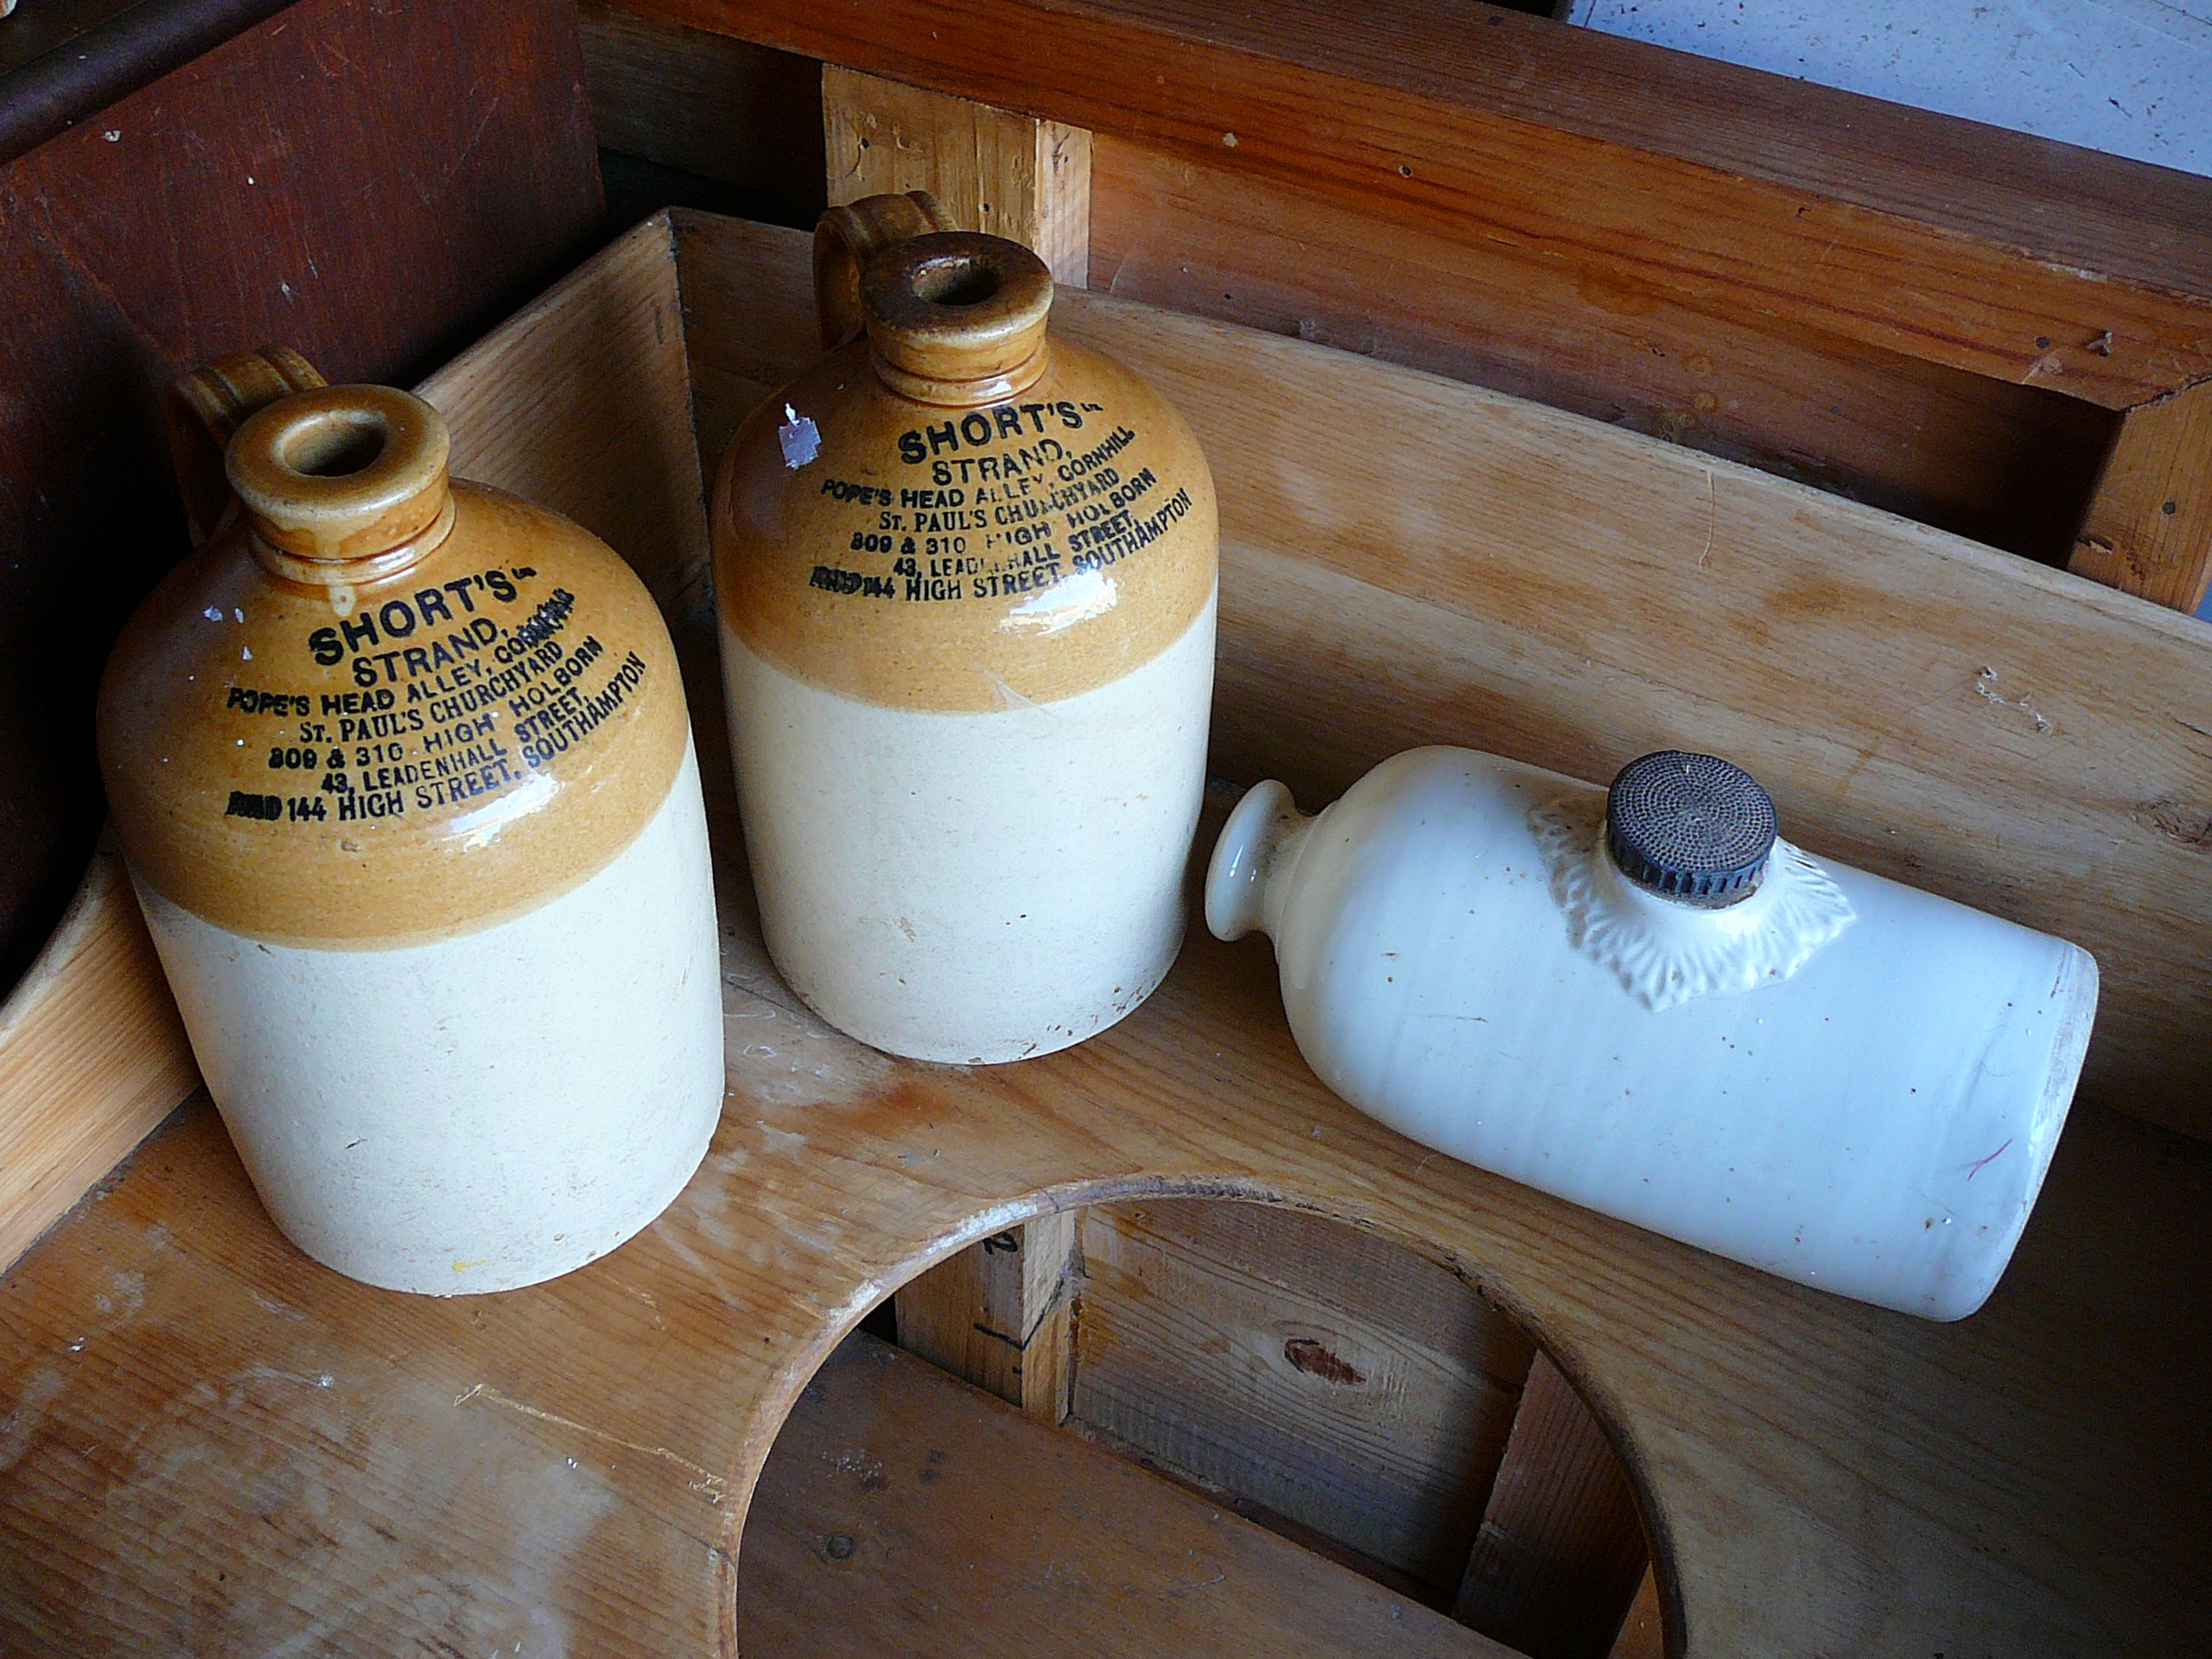 Stoneware hot water bottle and two stoneware flagons